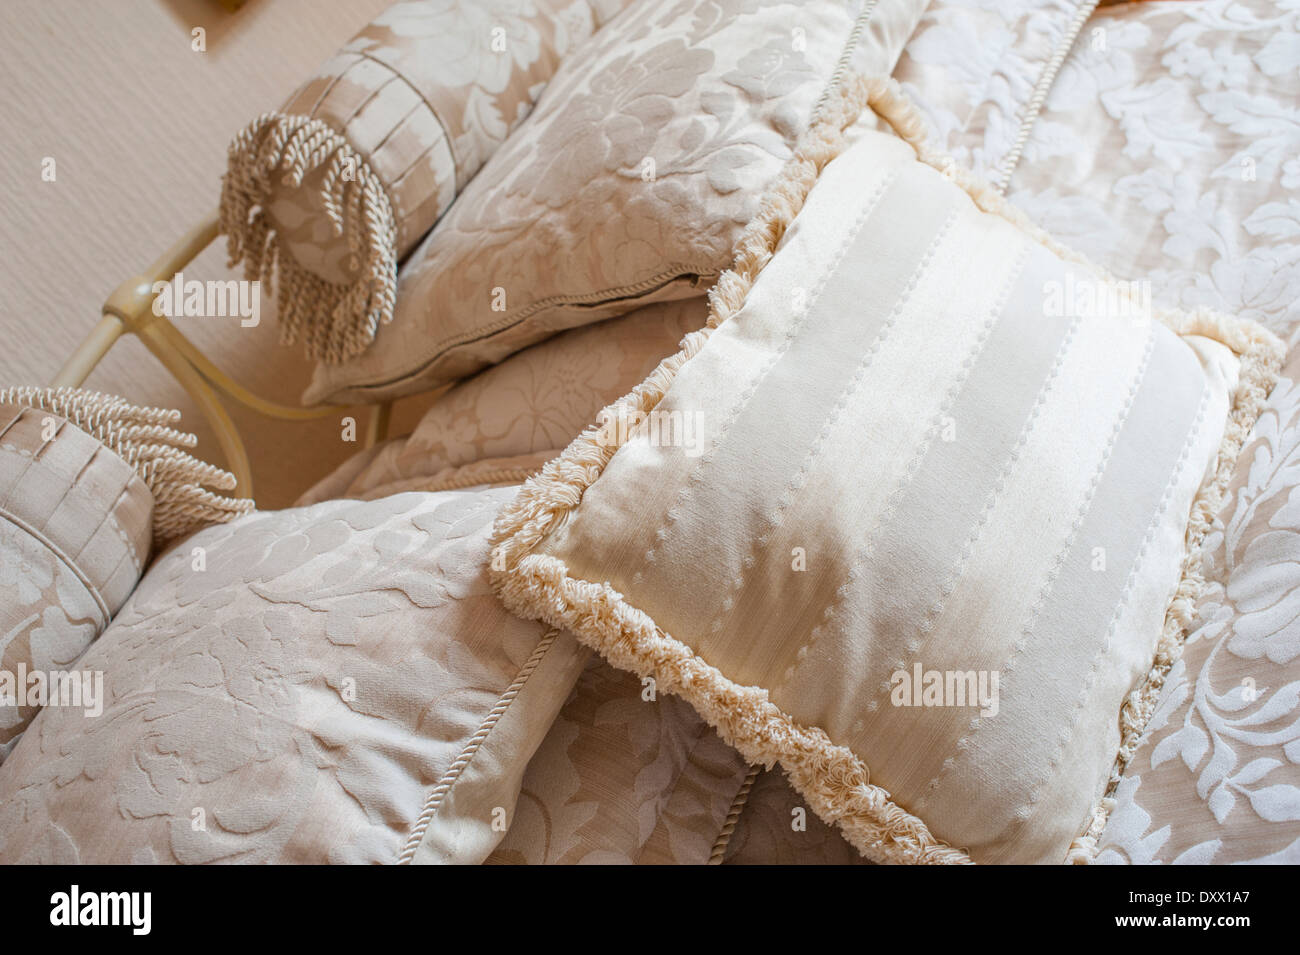 Cushions and pillows arranged on a bed. Stock Photo